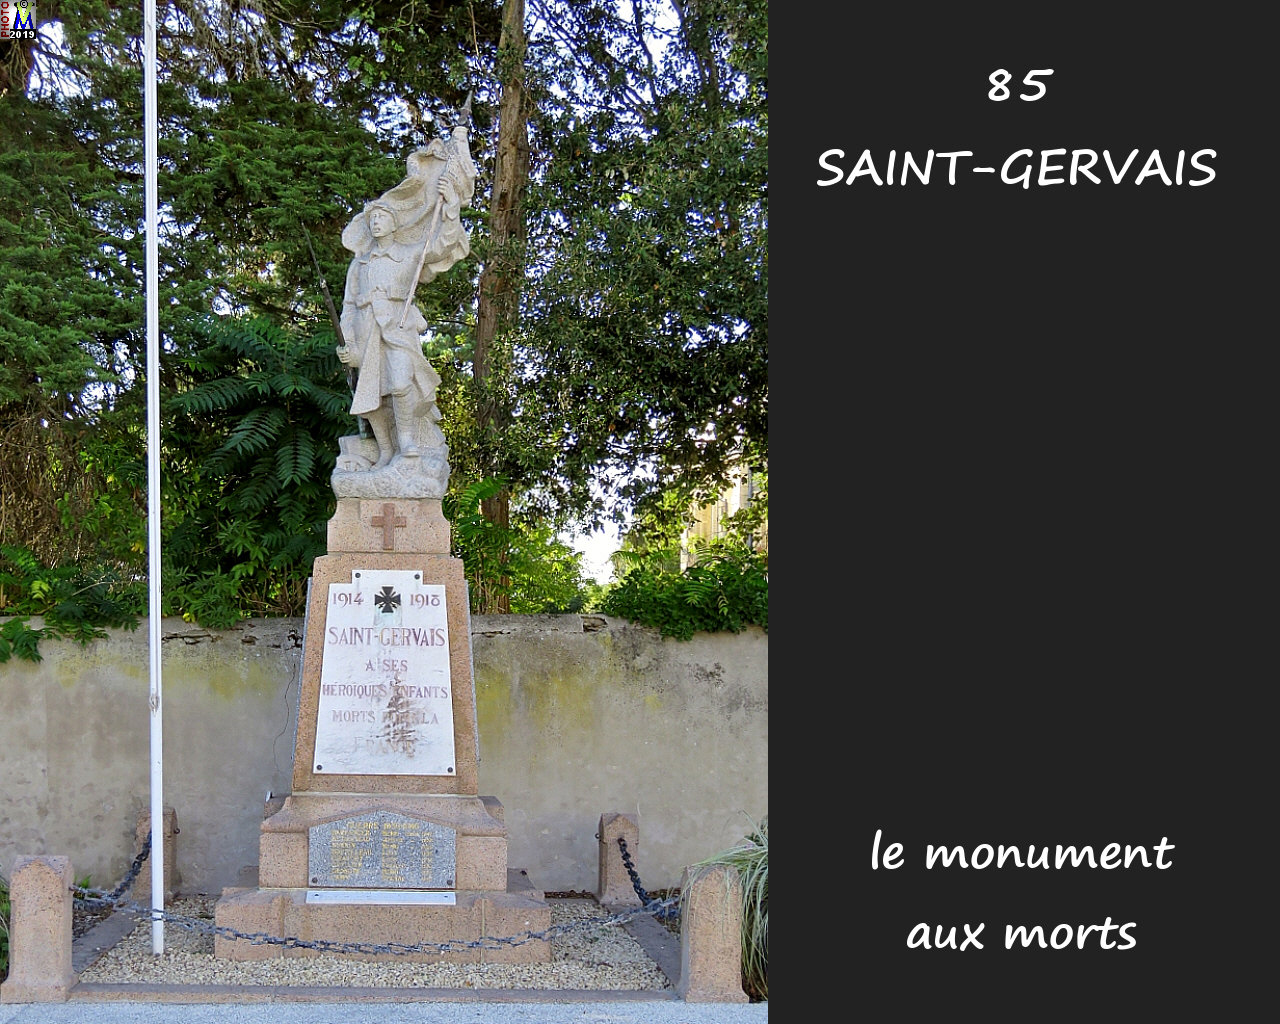 85StGERVAIS_morts_100.jpg